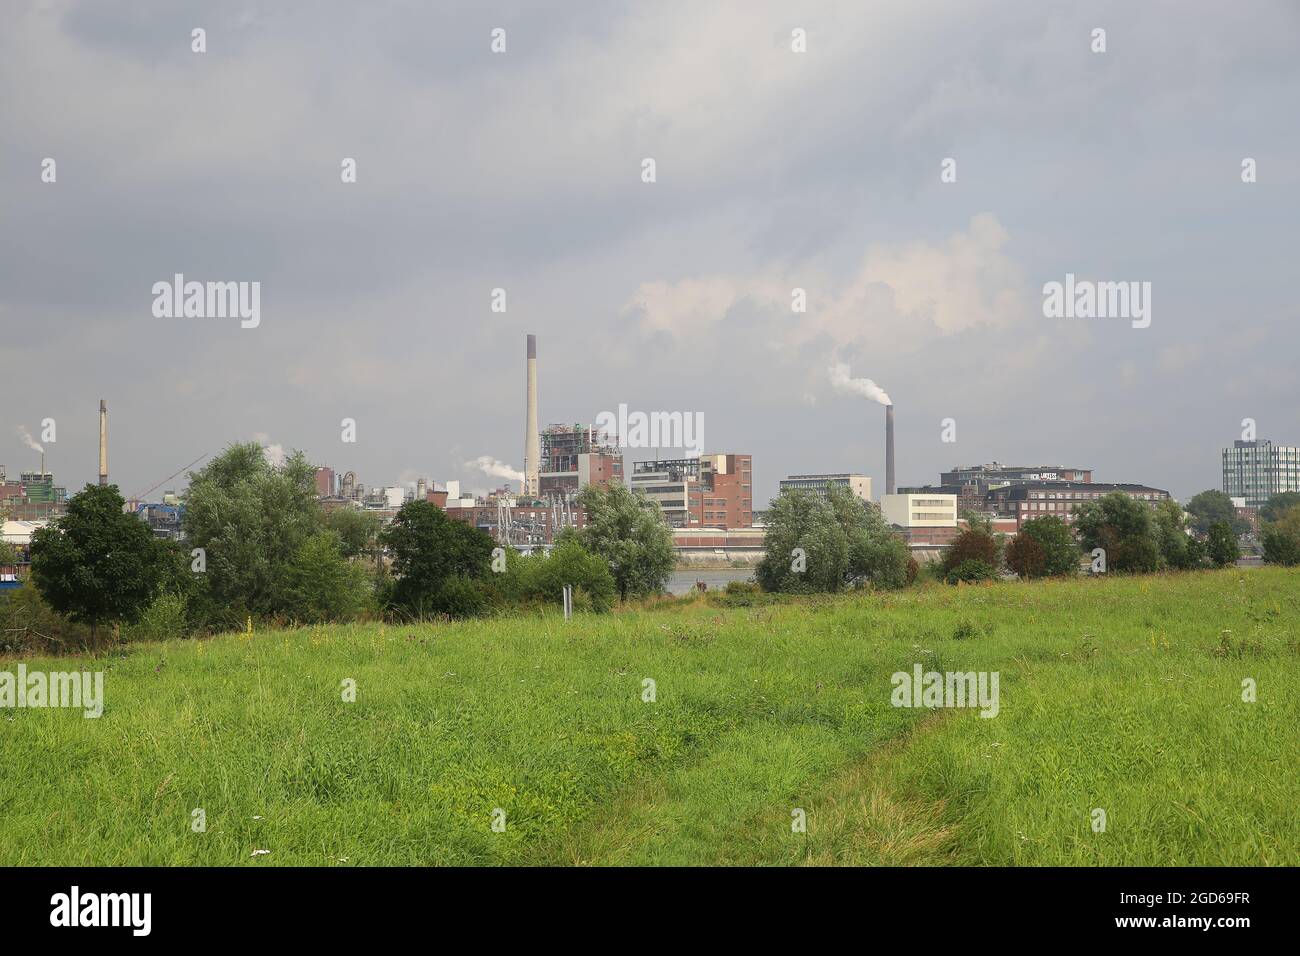 Krefeld (Uerdingen), Germany - July 9. 2021: View over green pasture and trees on river rhien with industrial area Stock Photo